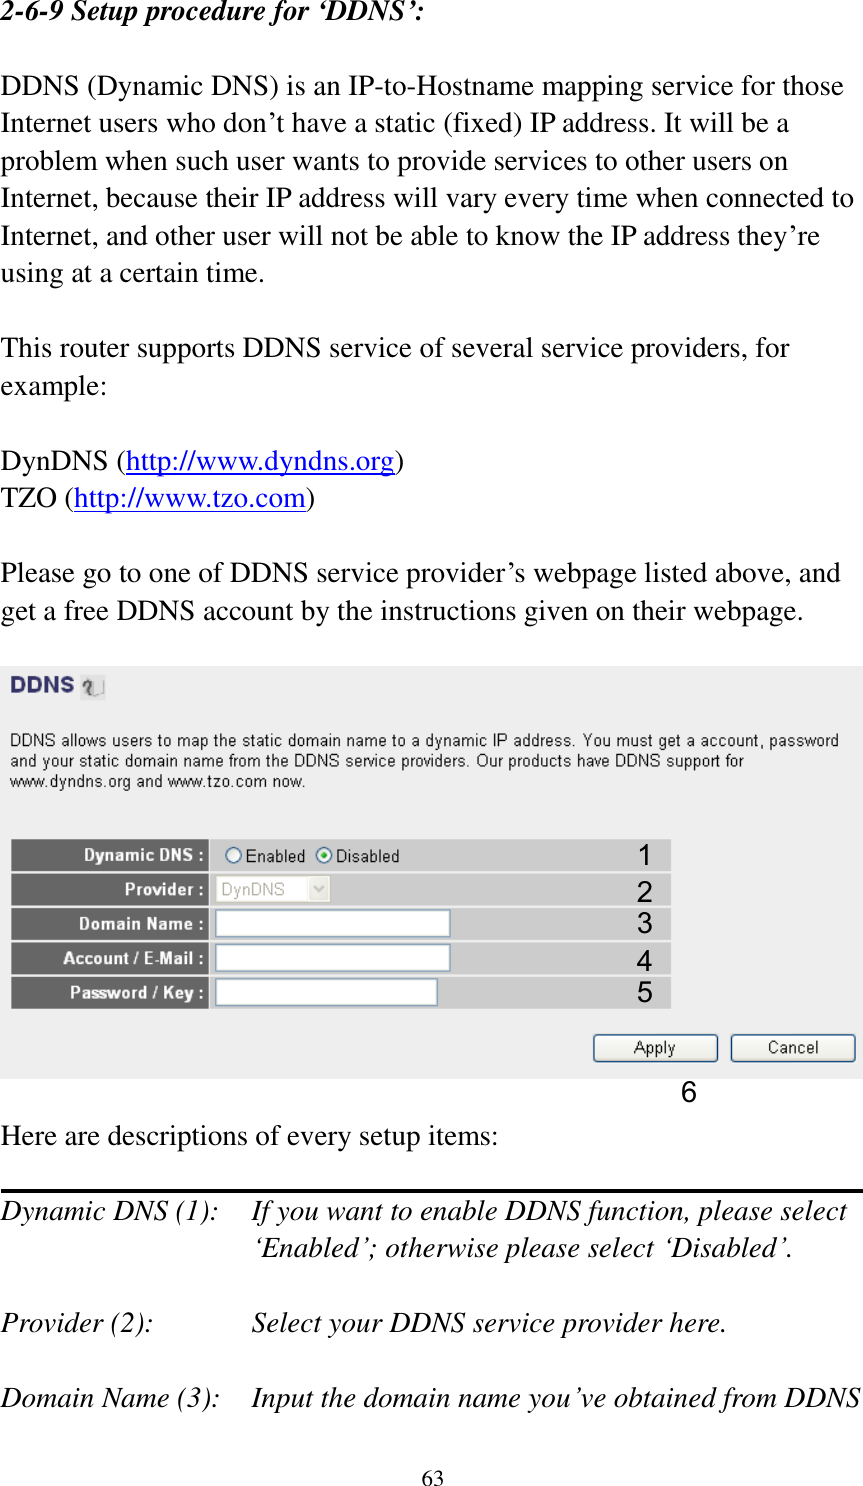 63 2-6-9 Setup procedure for ‘DDNS’:  DDNS (Dynamic DNS) is an IP-to-Hostname mapping service for those Internet users who don‟t have a static (fixed) IP address. It will be a problem when such user wants to provide services to other users on Internet, because their IP address will vary every time when connected to Internet, and other user will not be able to know the IP address they‟re using at a certain time.  This router supports DDNS service of several service providers, for example:  DynDNS (http://www.dyndns.org) TZO (http://www.tzo.com)  Please go to one of DDNS service provider‟s webpage listed above, and get a free DDNS account by the instructions given on their webpage.    Here are descriptions of every setup items:  Dynamic DNS (1):    If you want to enable DDNS function, please select „Enabled‟; otherwise please select „Disabled‟.  Provider (2):      Select your DDNS service provider here.  Domain Name (3):    Input the domain name you‟ve obtained from DDNS 1 2 3 4 5 6 